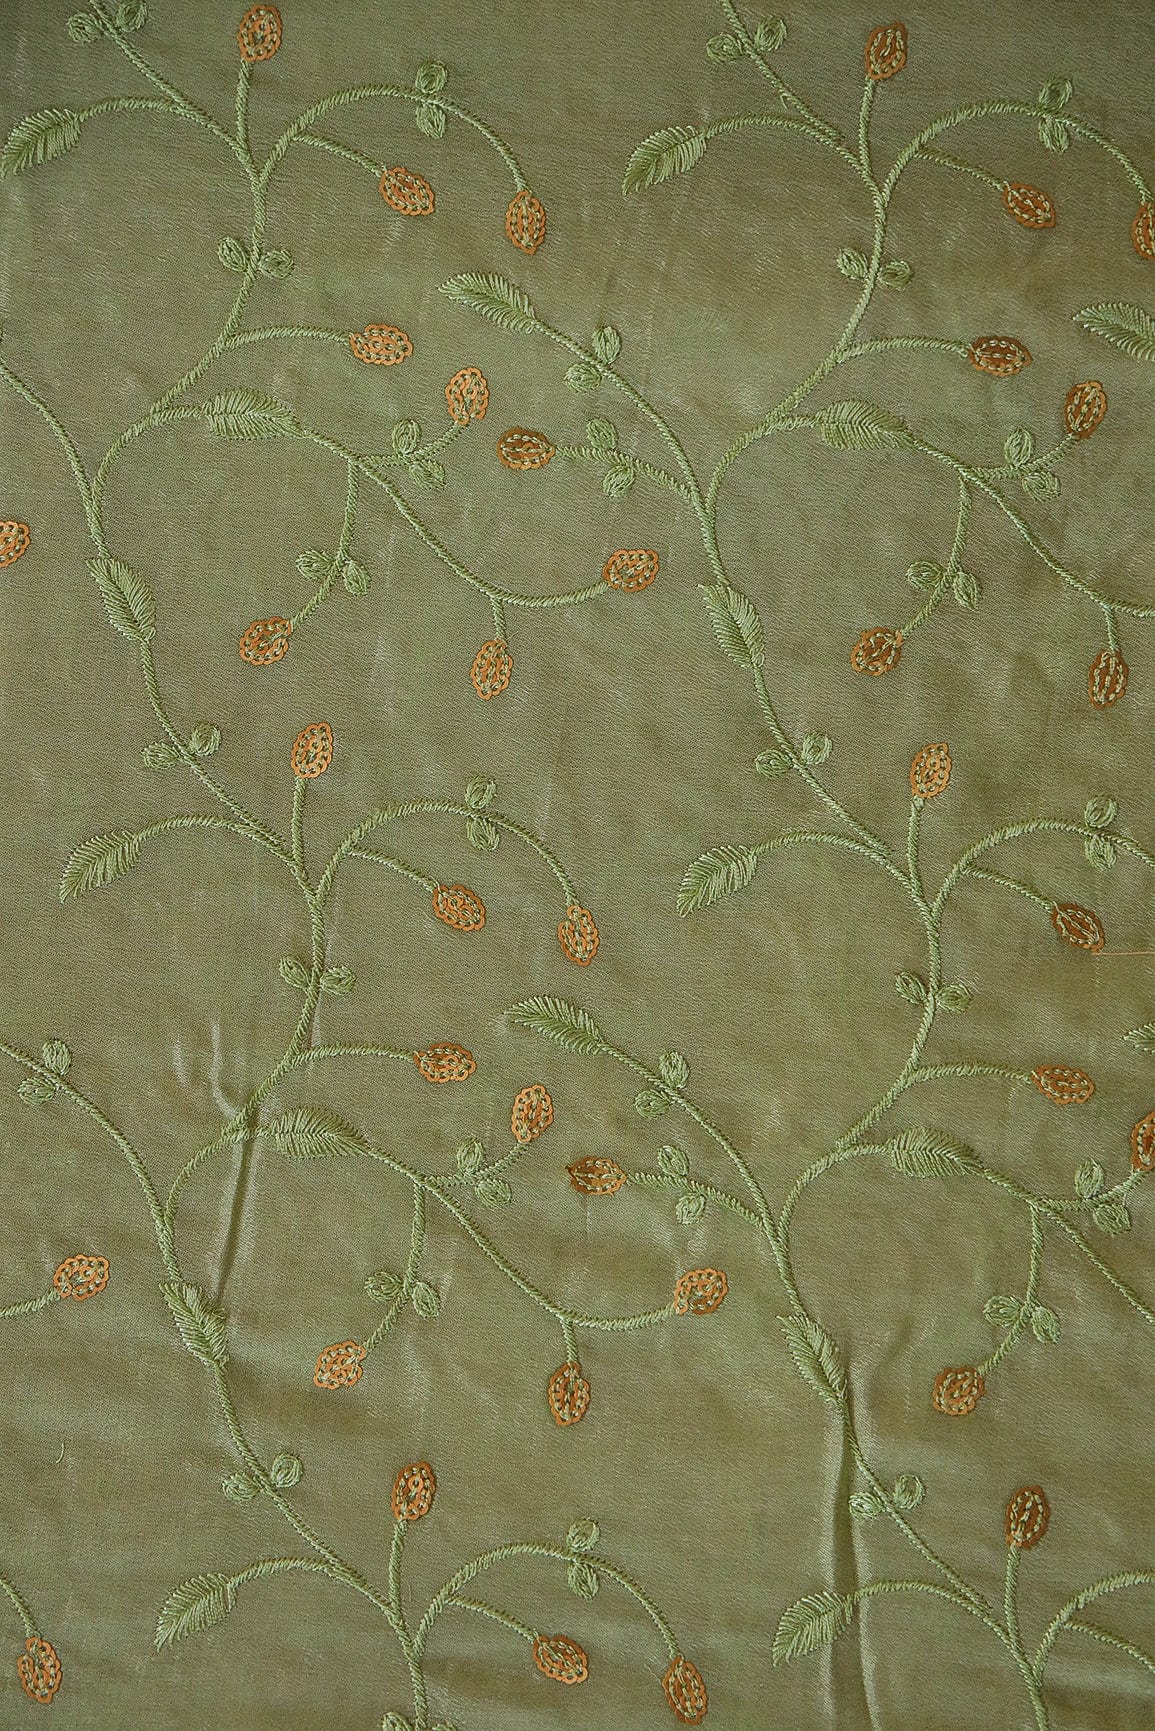 doeraa Embroidery Fabrics Leafy Gold Sequins With Olive Thread Embroidery Work On Olive Chinnon Chiffon Fabric